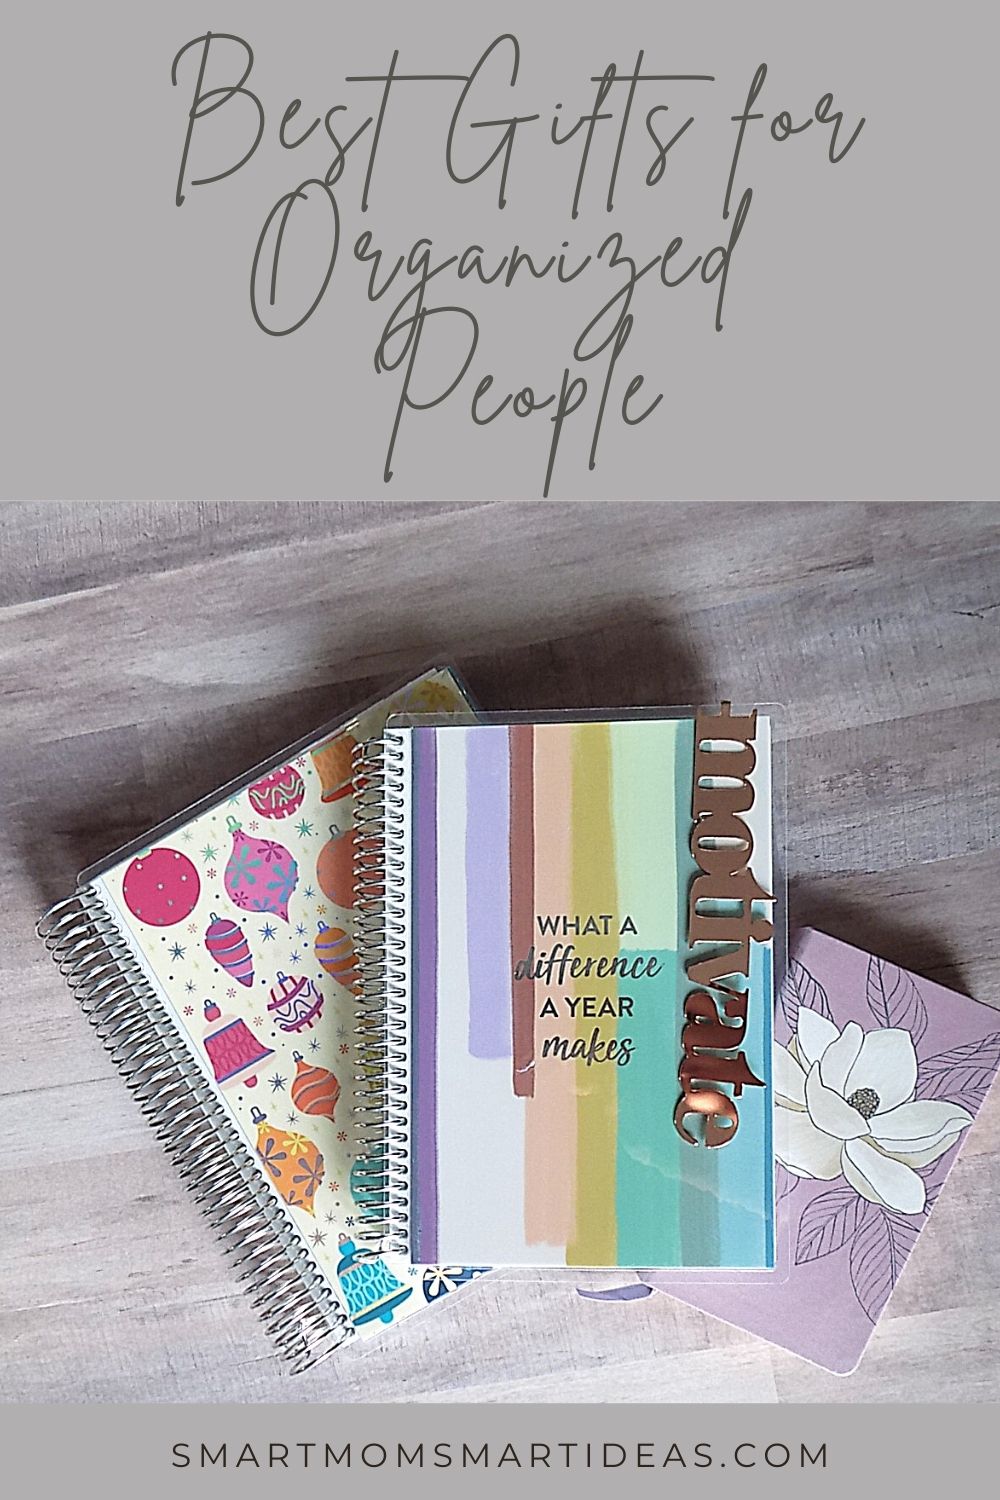 7 Great Gifts for Organized People: A List for the organizer you love